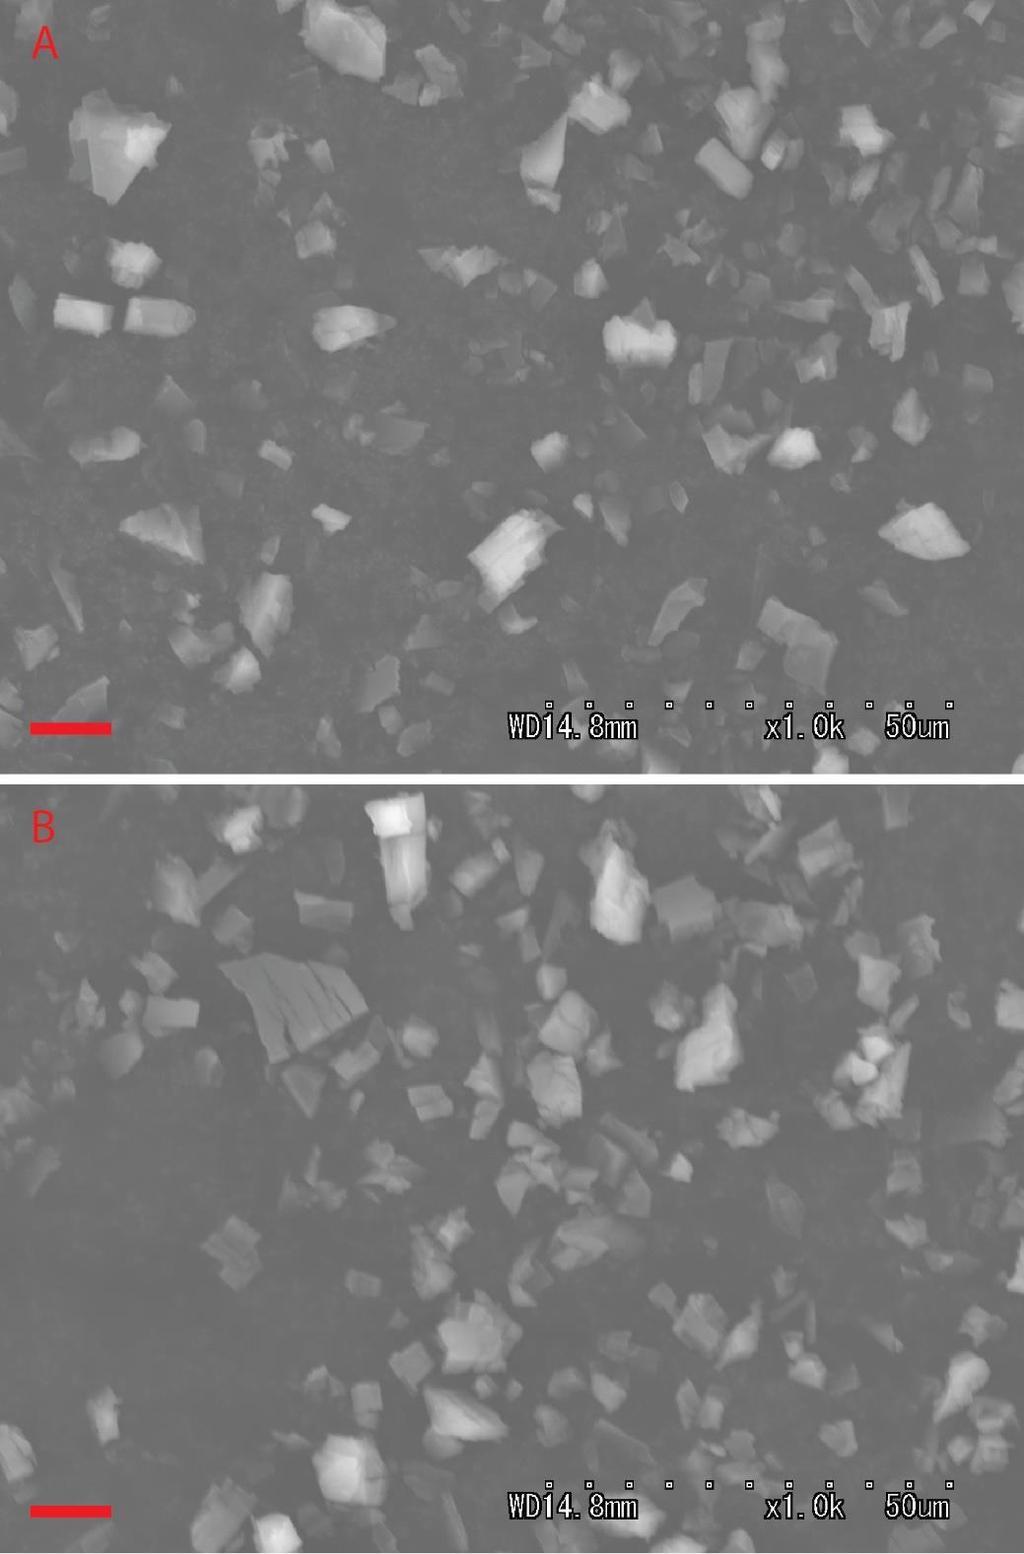 Figure S2: A, B: SEM micrographs of 1-PSt(7%) (A) and 1-PSt(16%) (B). The red scale bars represent 10 m. No PSt is observed outside of the MOF particles.